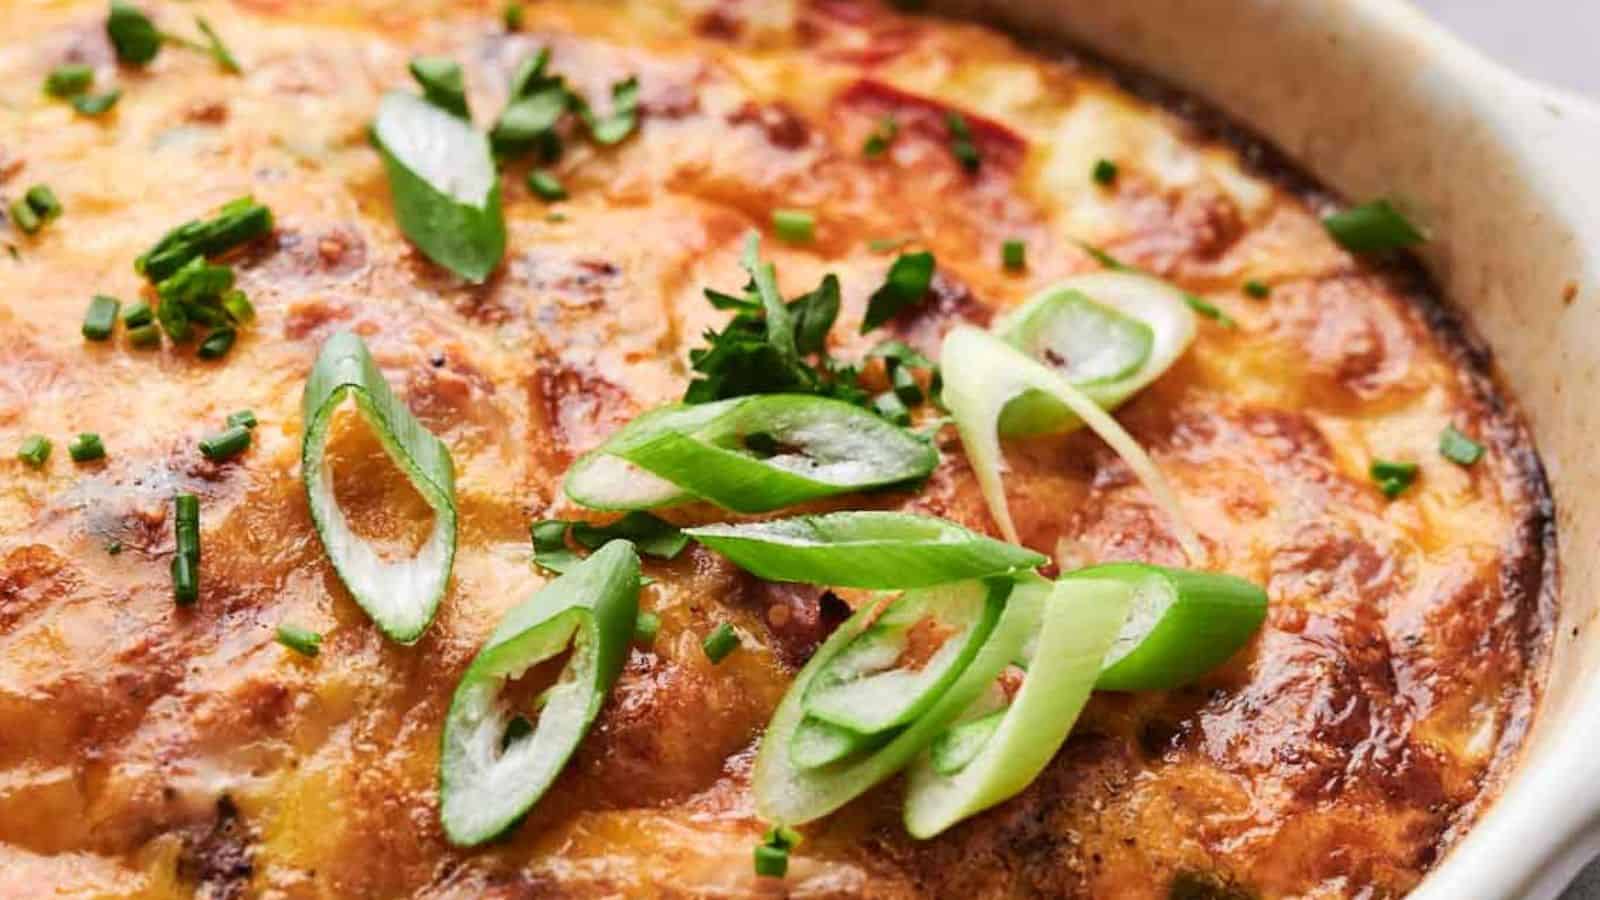 Breakfast casserole topped with melted cheese, garnished with sliced green onions and chopped herbs.